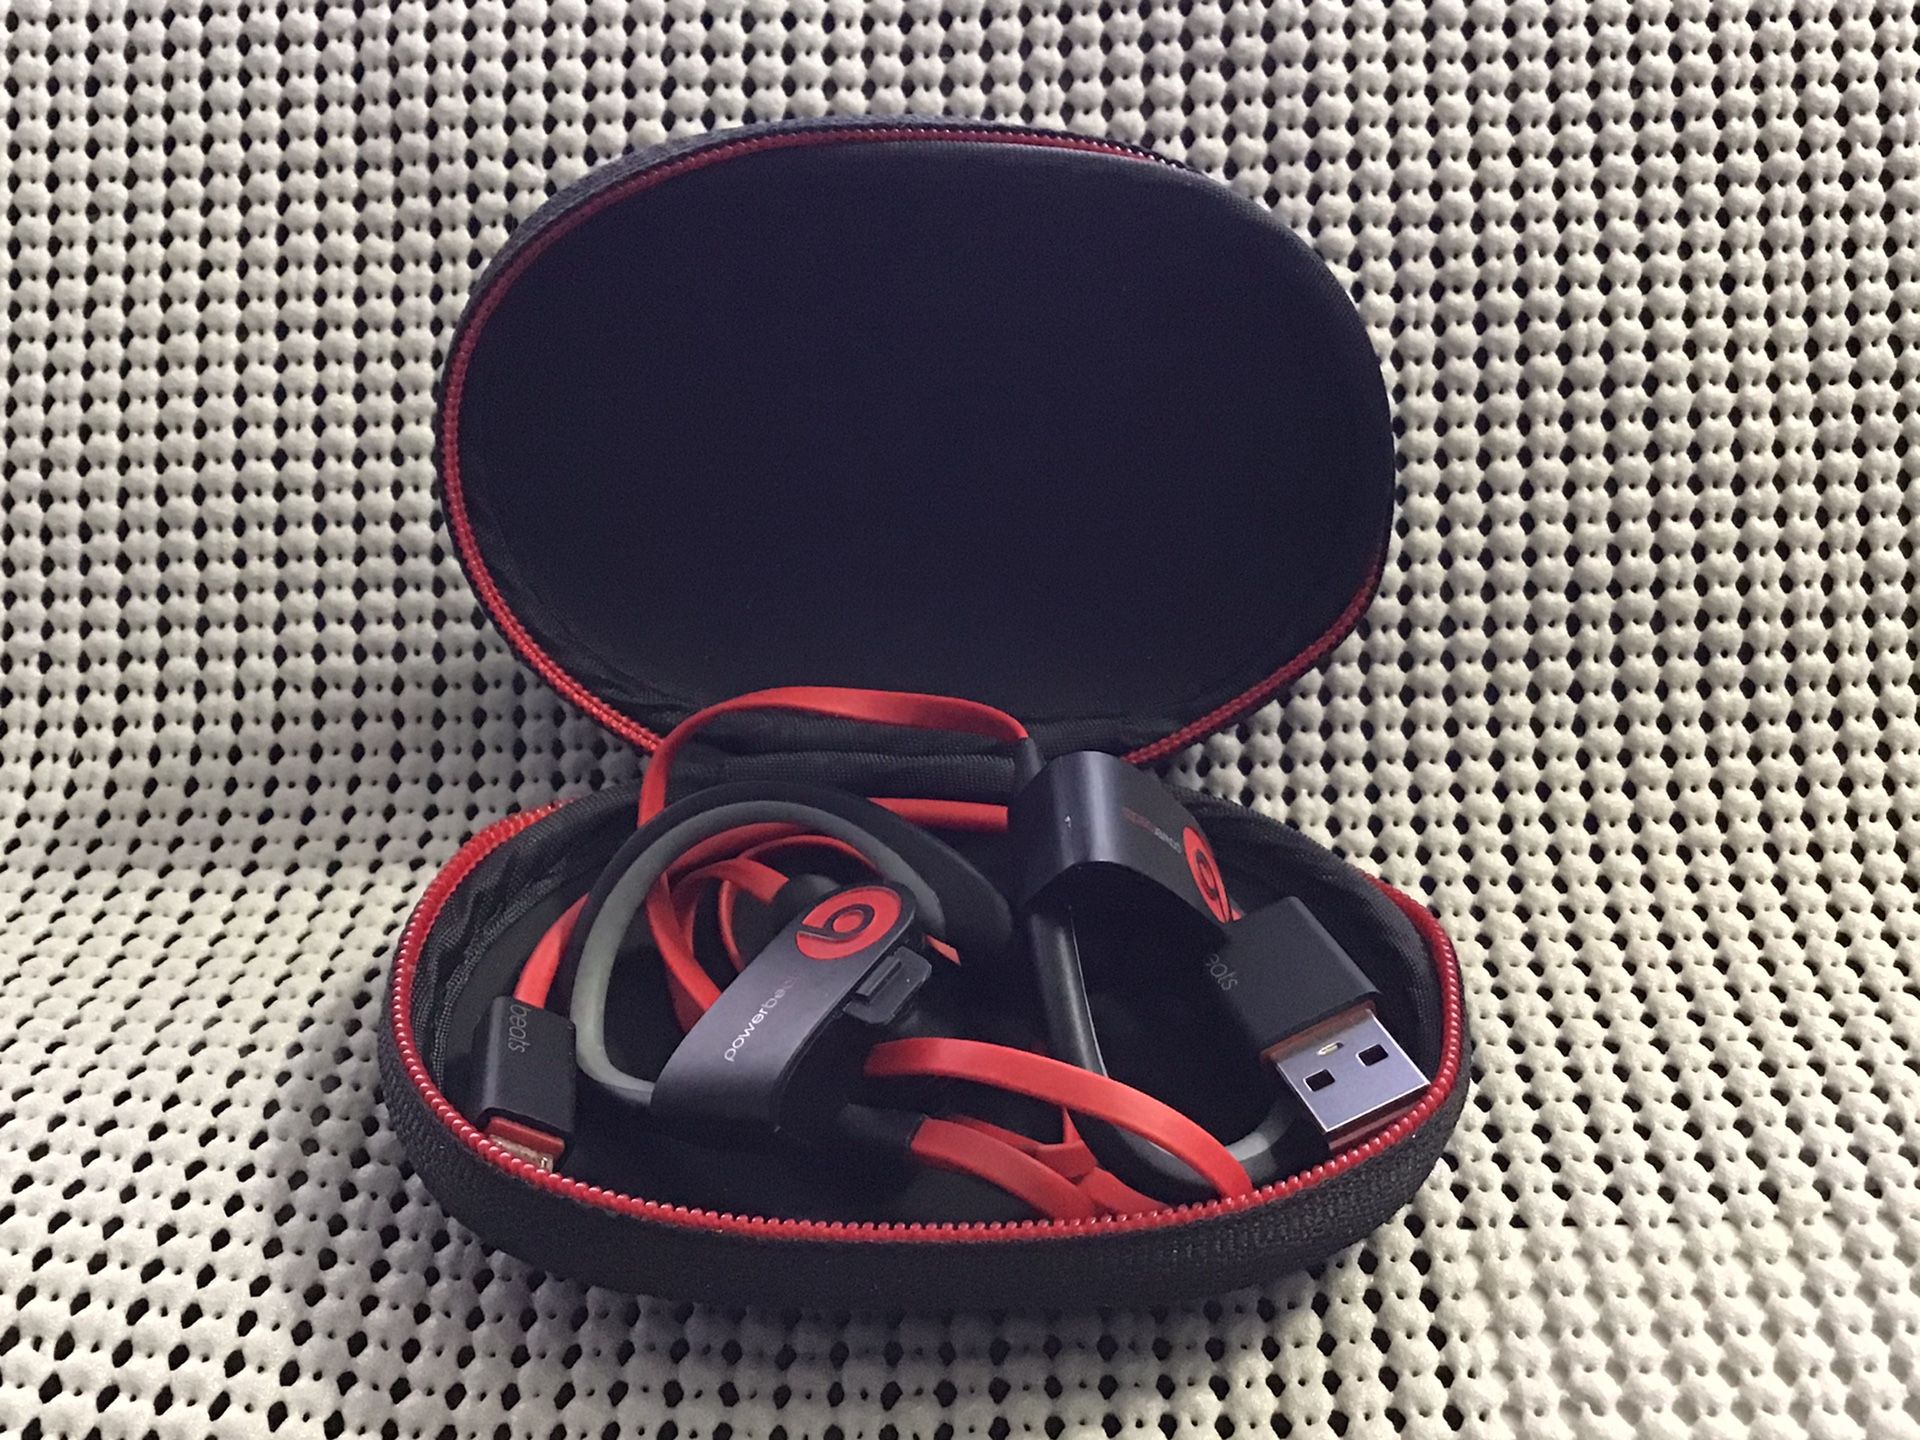 Beats by “Dr. Dre” Wireless In-Ear Bluetooth Headphone with Mic 🎤- Black & Red